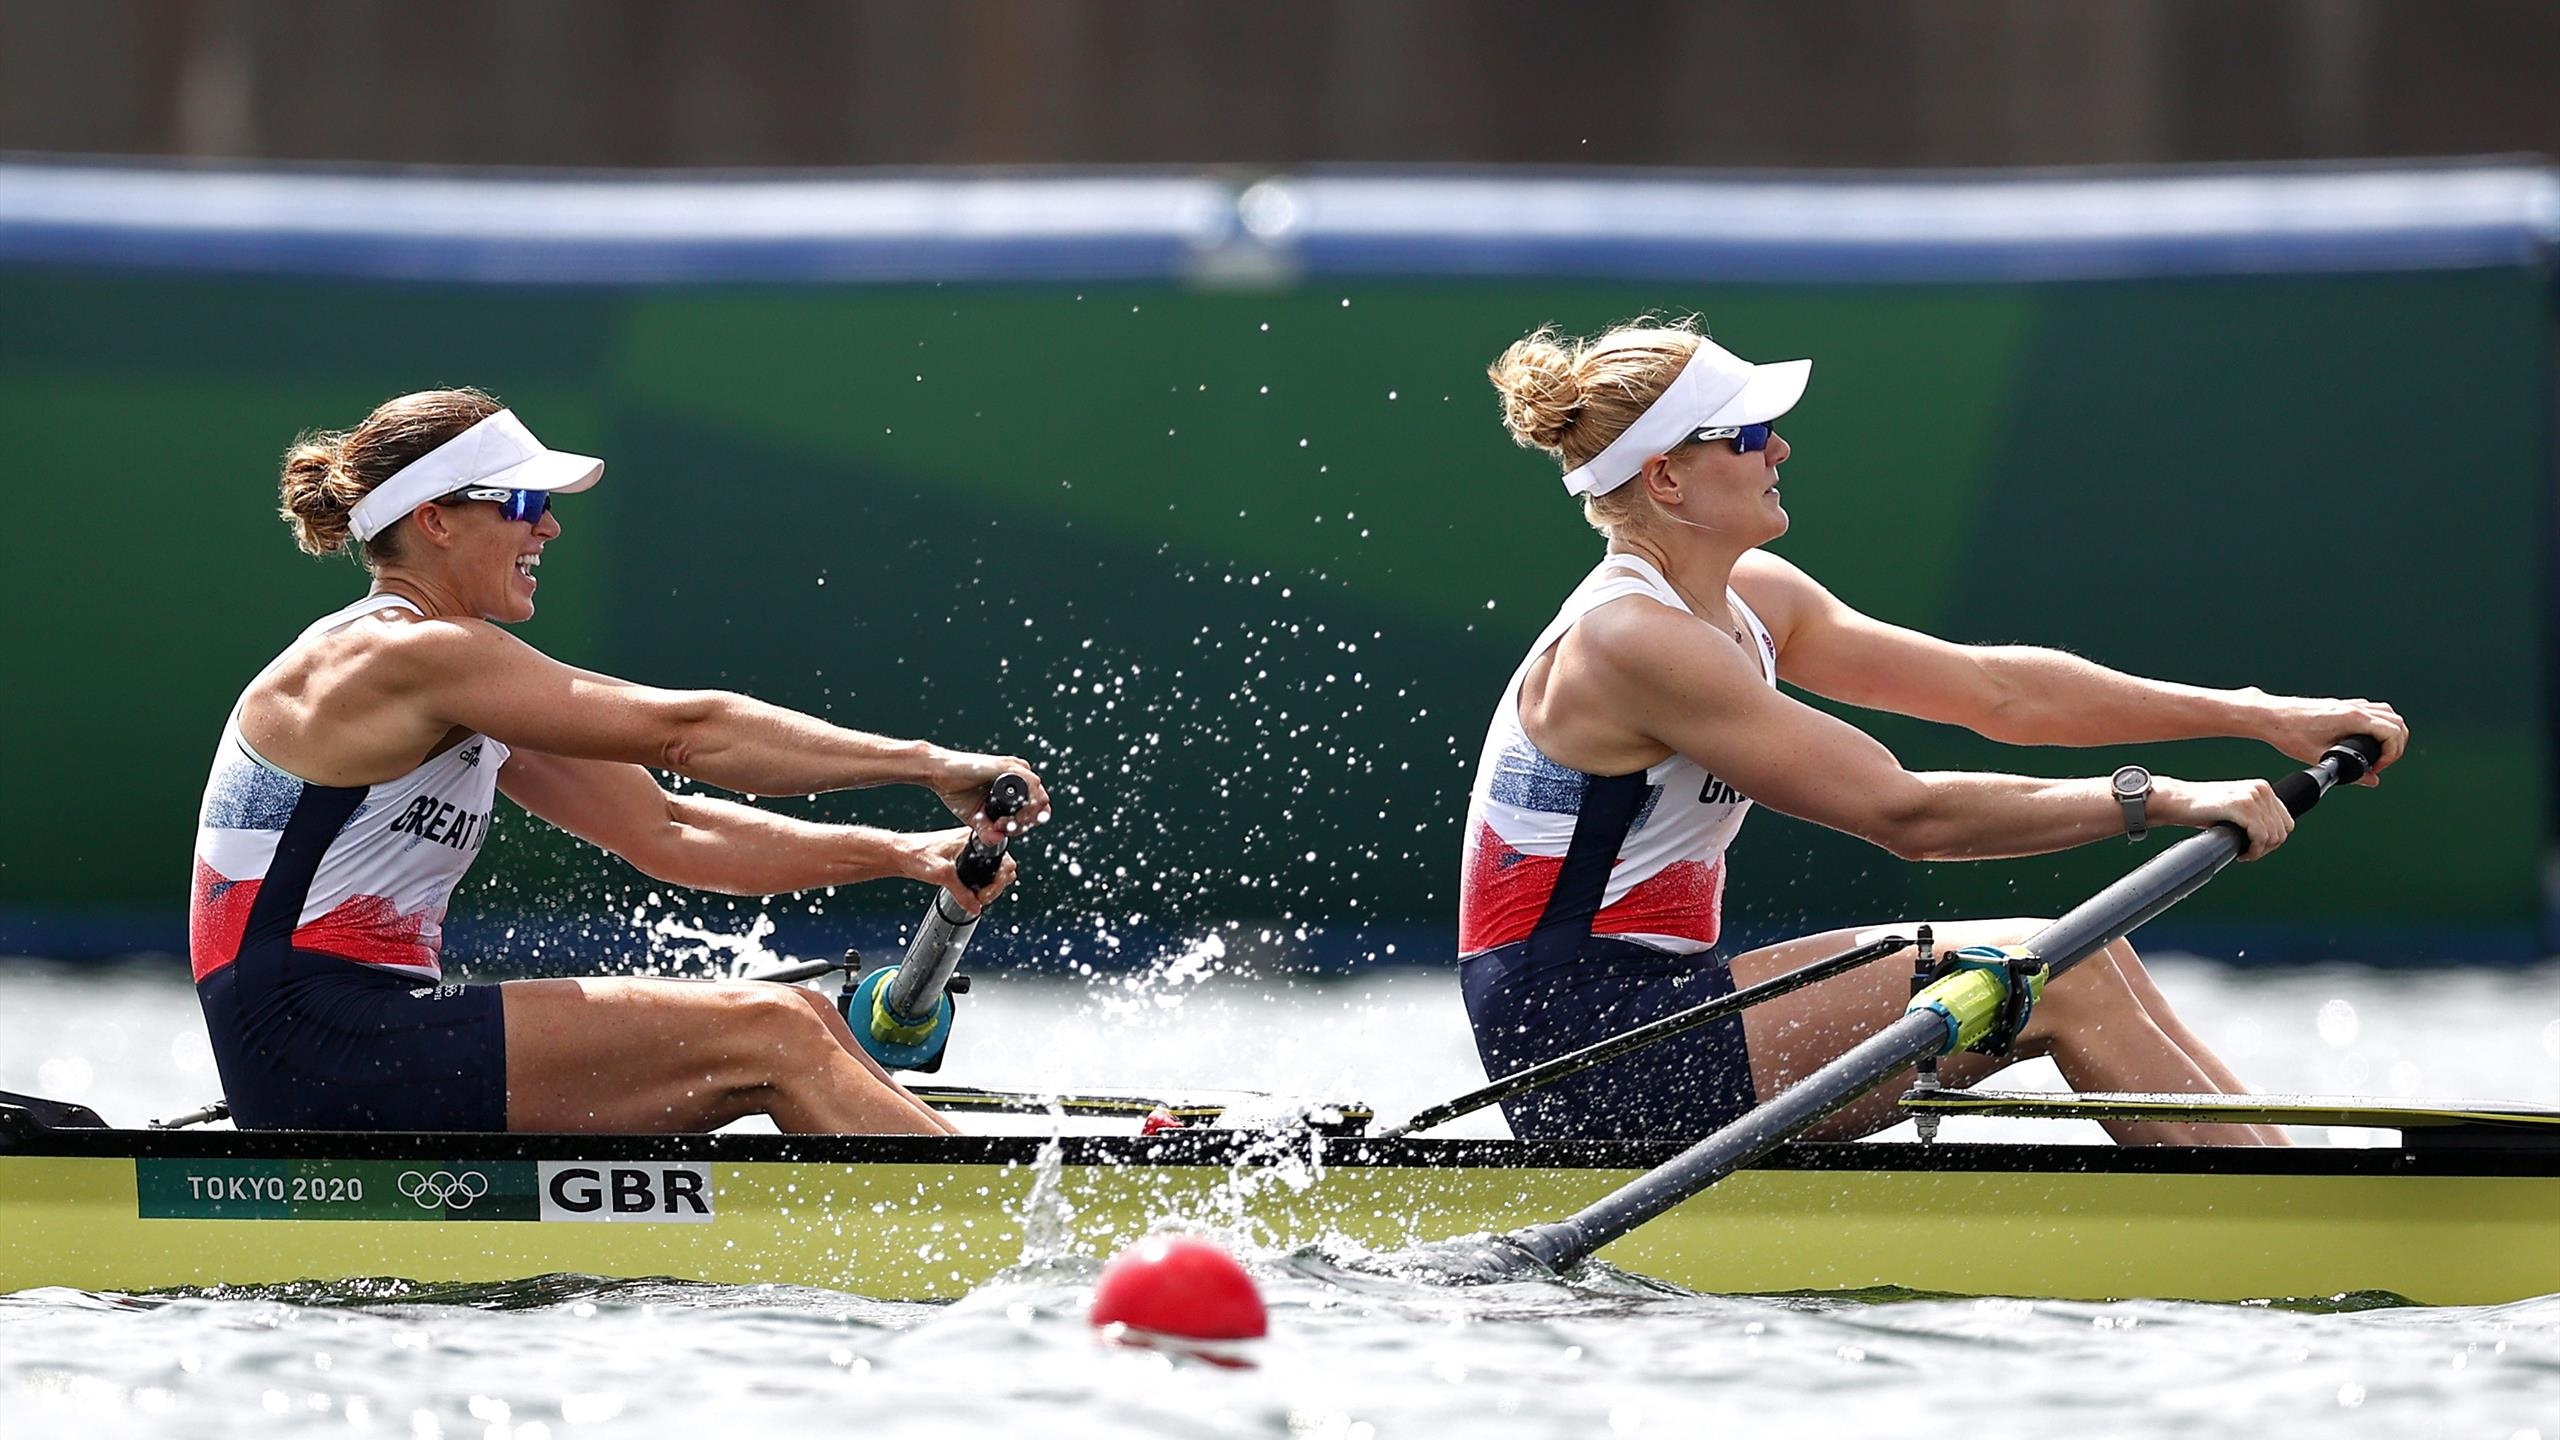 Rowing: Helen Glover and Polly Swann, The British sweep pulling team at the Tokyo 2020. 2560x1440 HD Wallpaper.